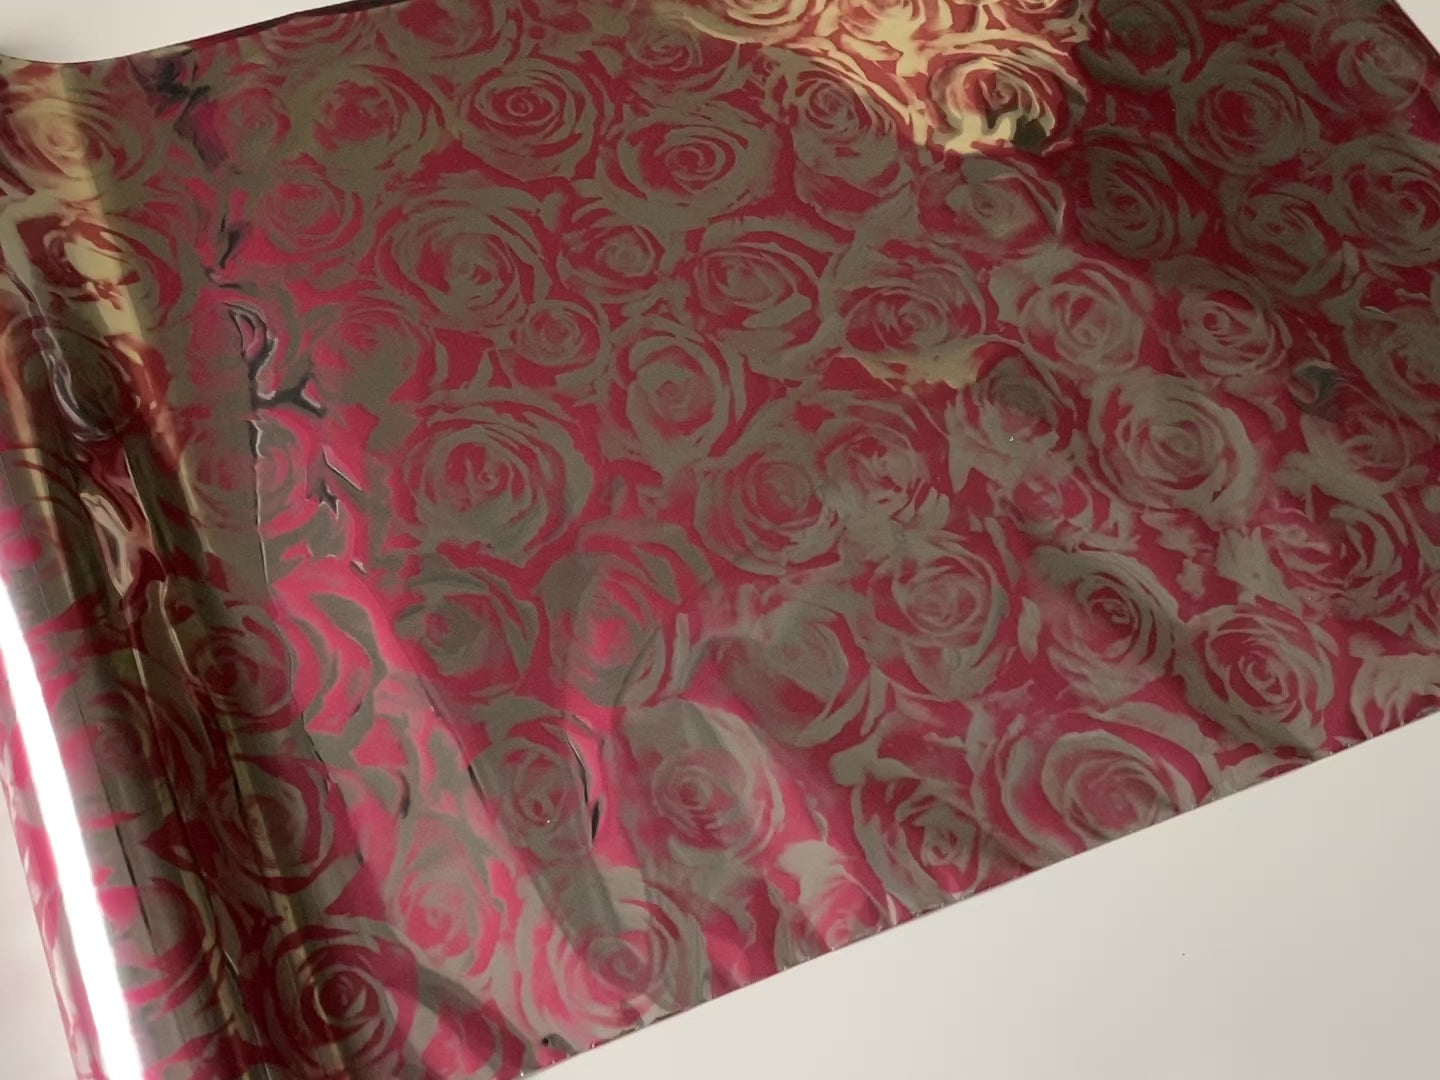 A 12 second video that shows a close-up of a roll of Artistic Painting Studio's Roses Pink Metallic Transfer Foil against a white background.